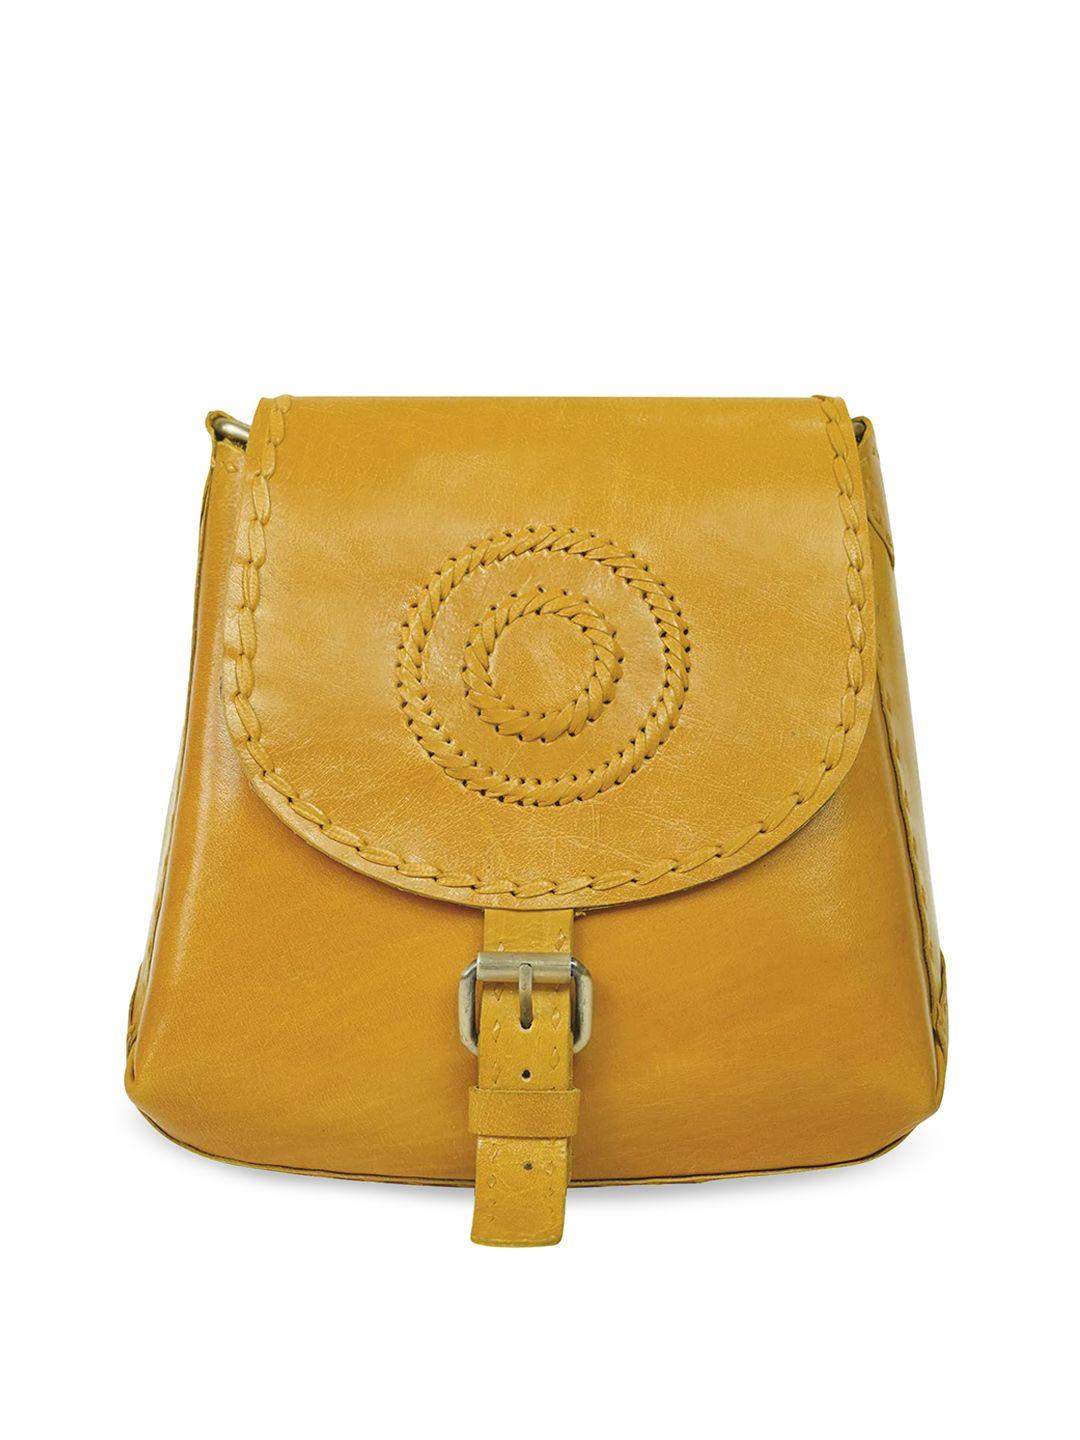 goatter yellow leather structured sling bag